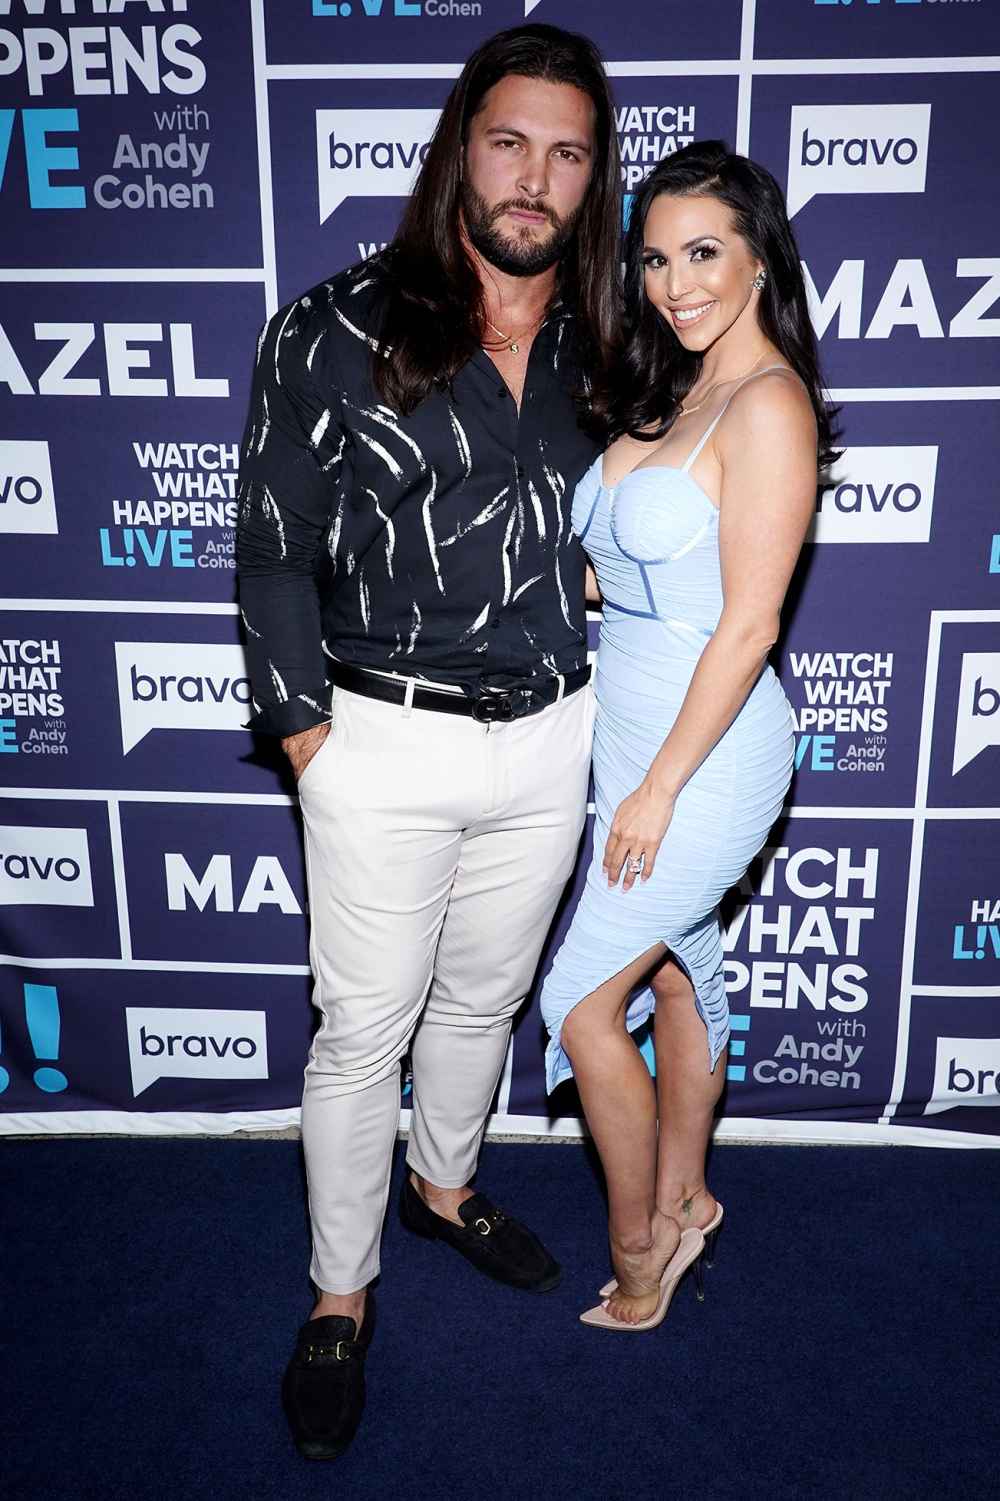 Scheana Shay Says Postpartum Hair Loss Is Her Biggest Insecurity 2 Brock Davies